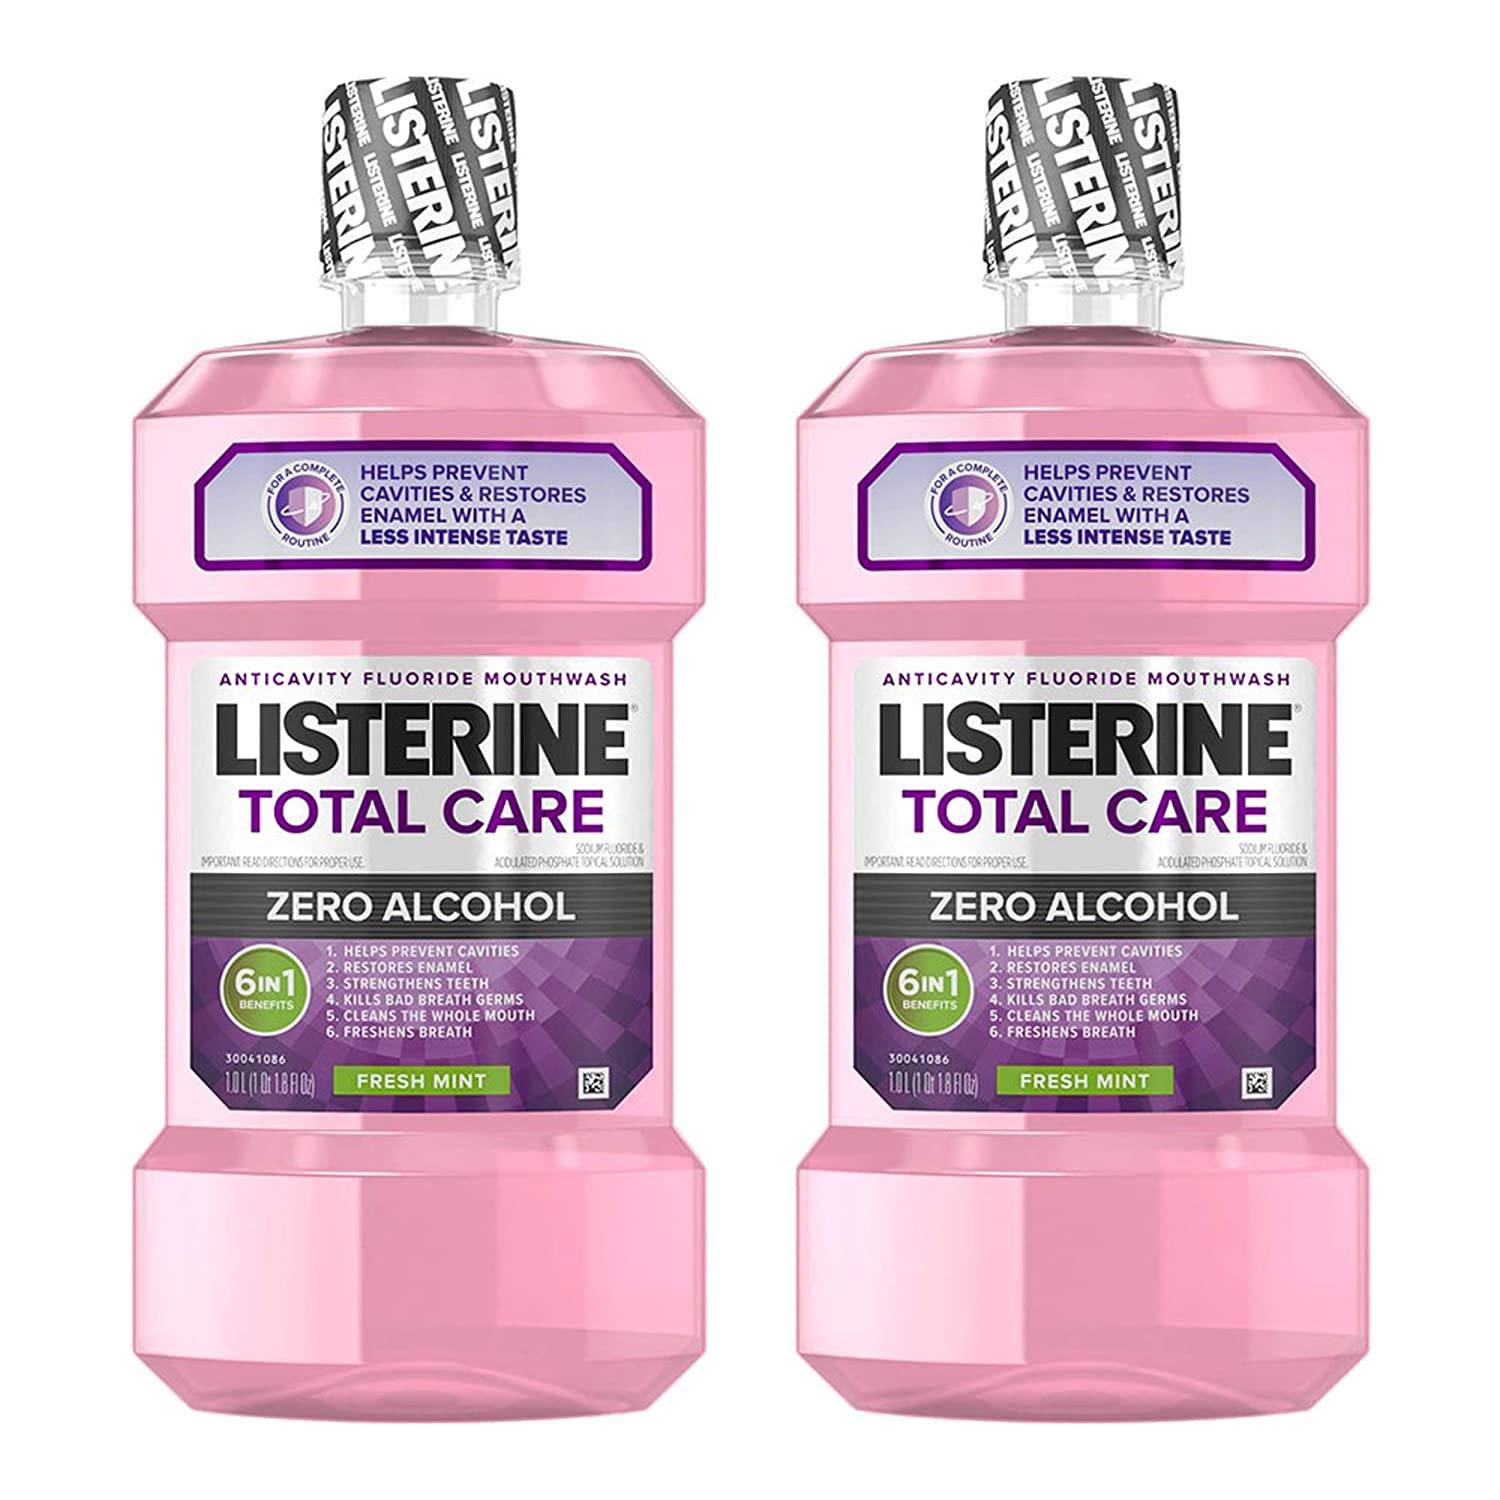 2 Listerine Total Care Alcohol-Free Anticavity Mouthwash for $8.83 Shipped